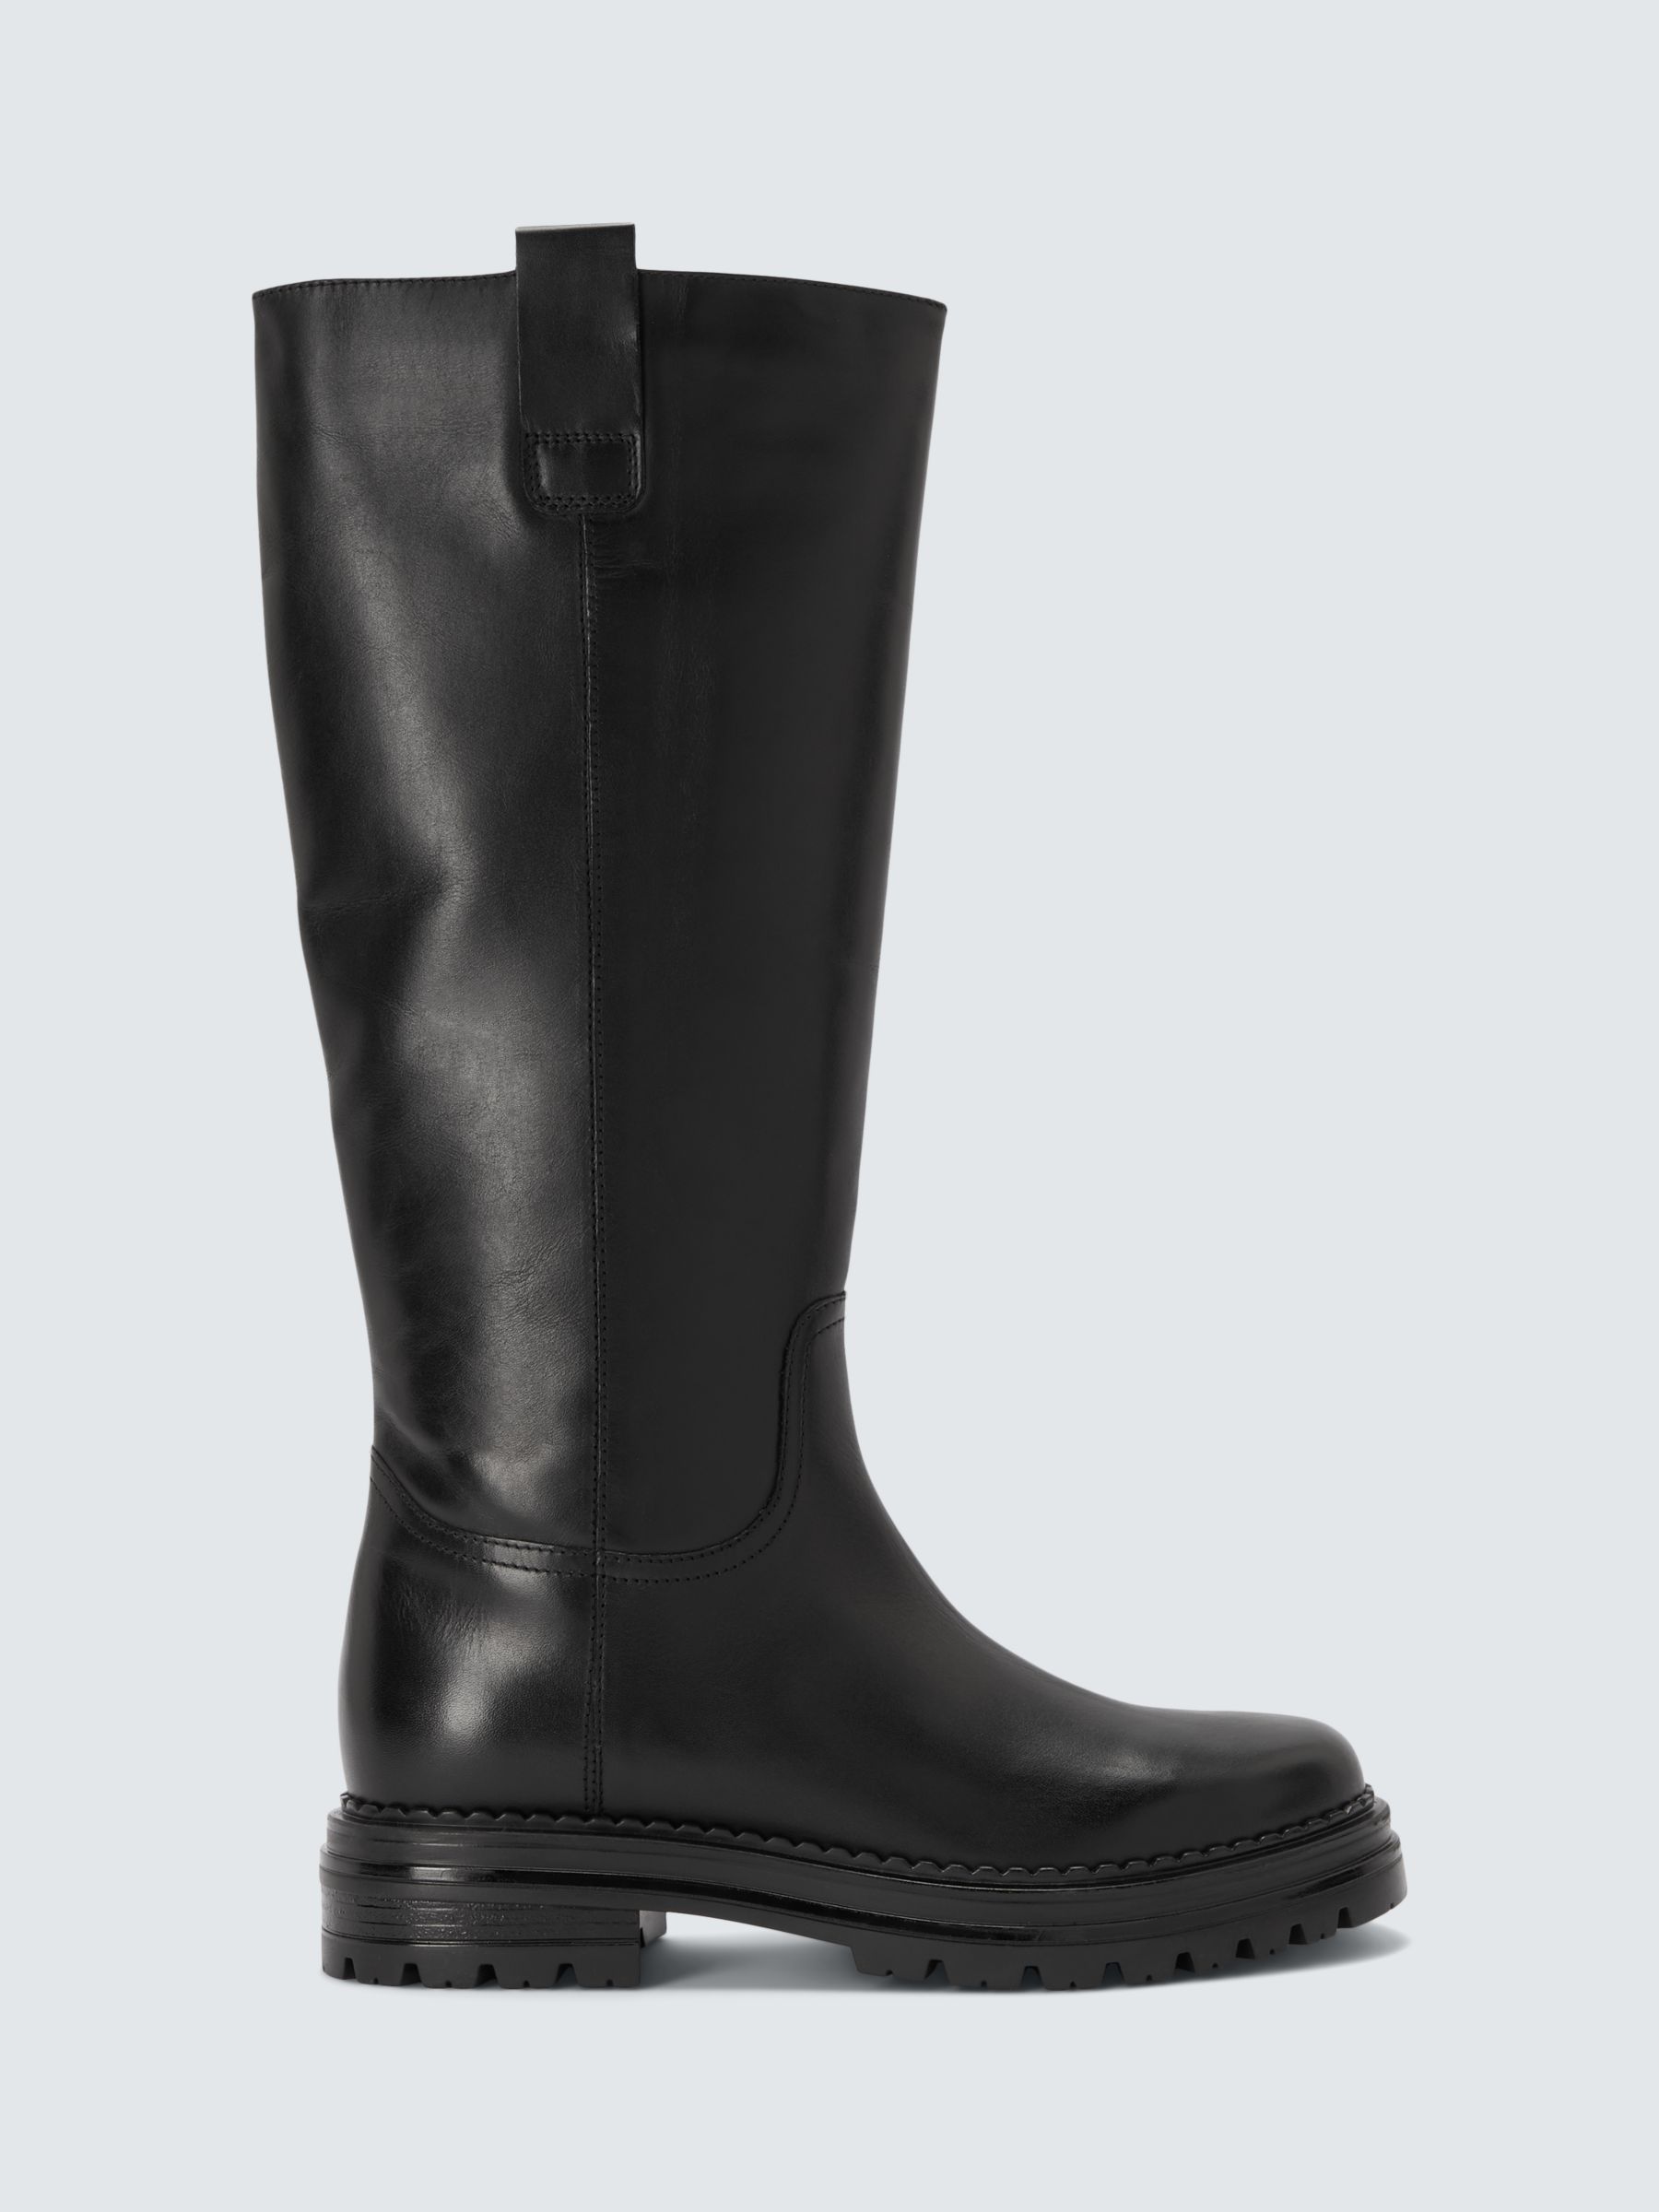 AND/OR Tabie Leather Chunky Sole Knee High Boots, Black at John Lewis ...